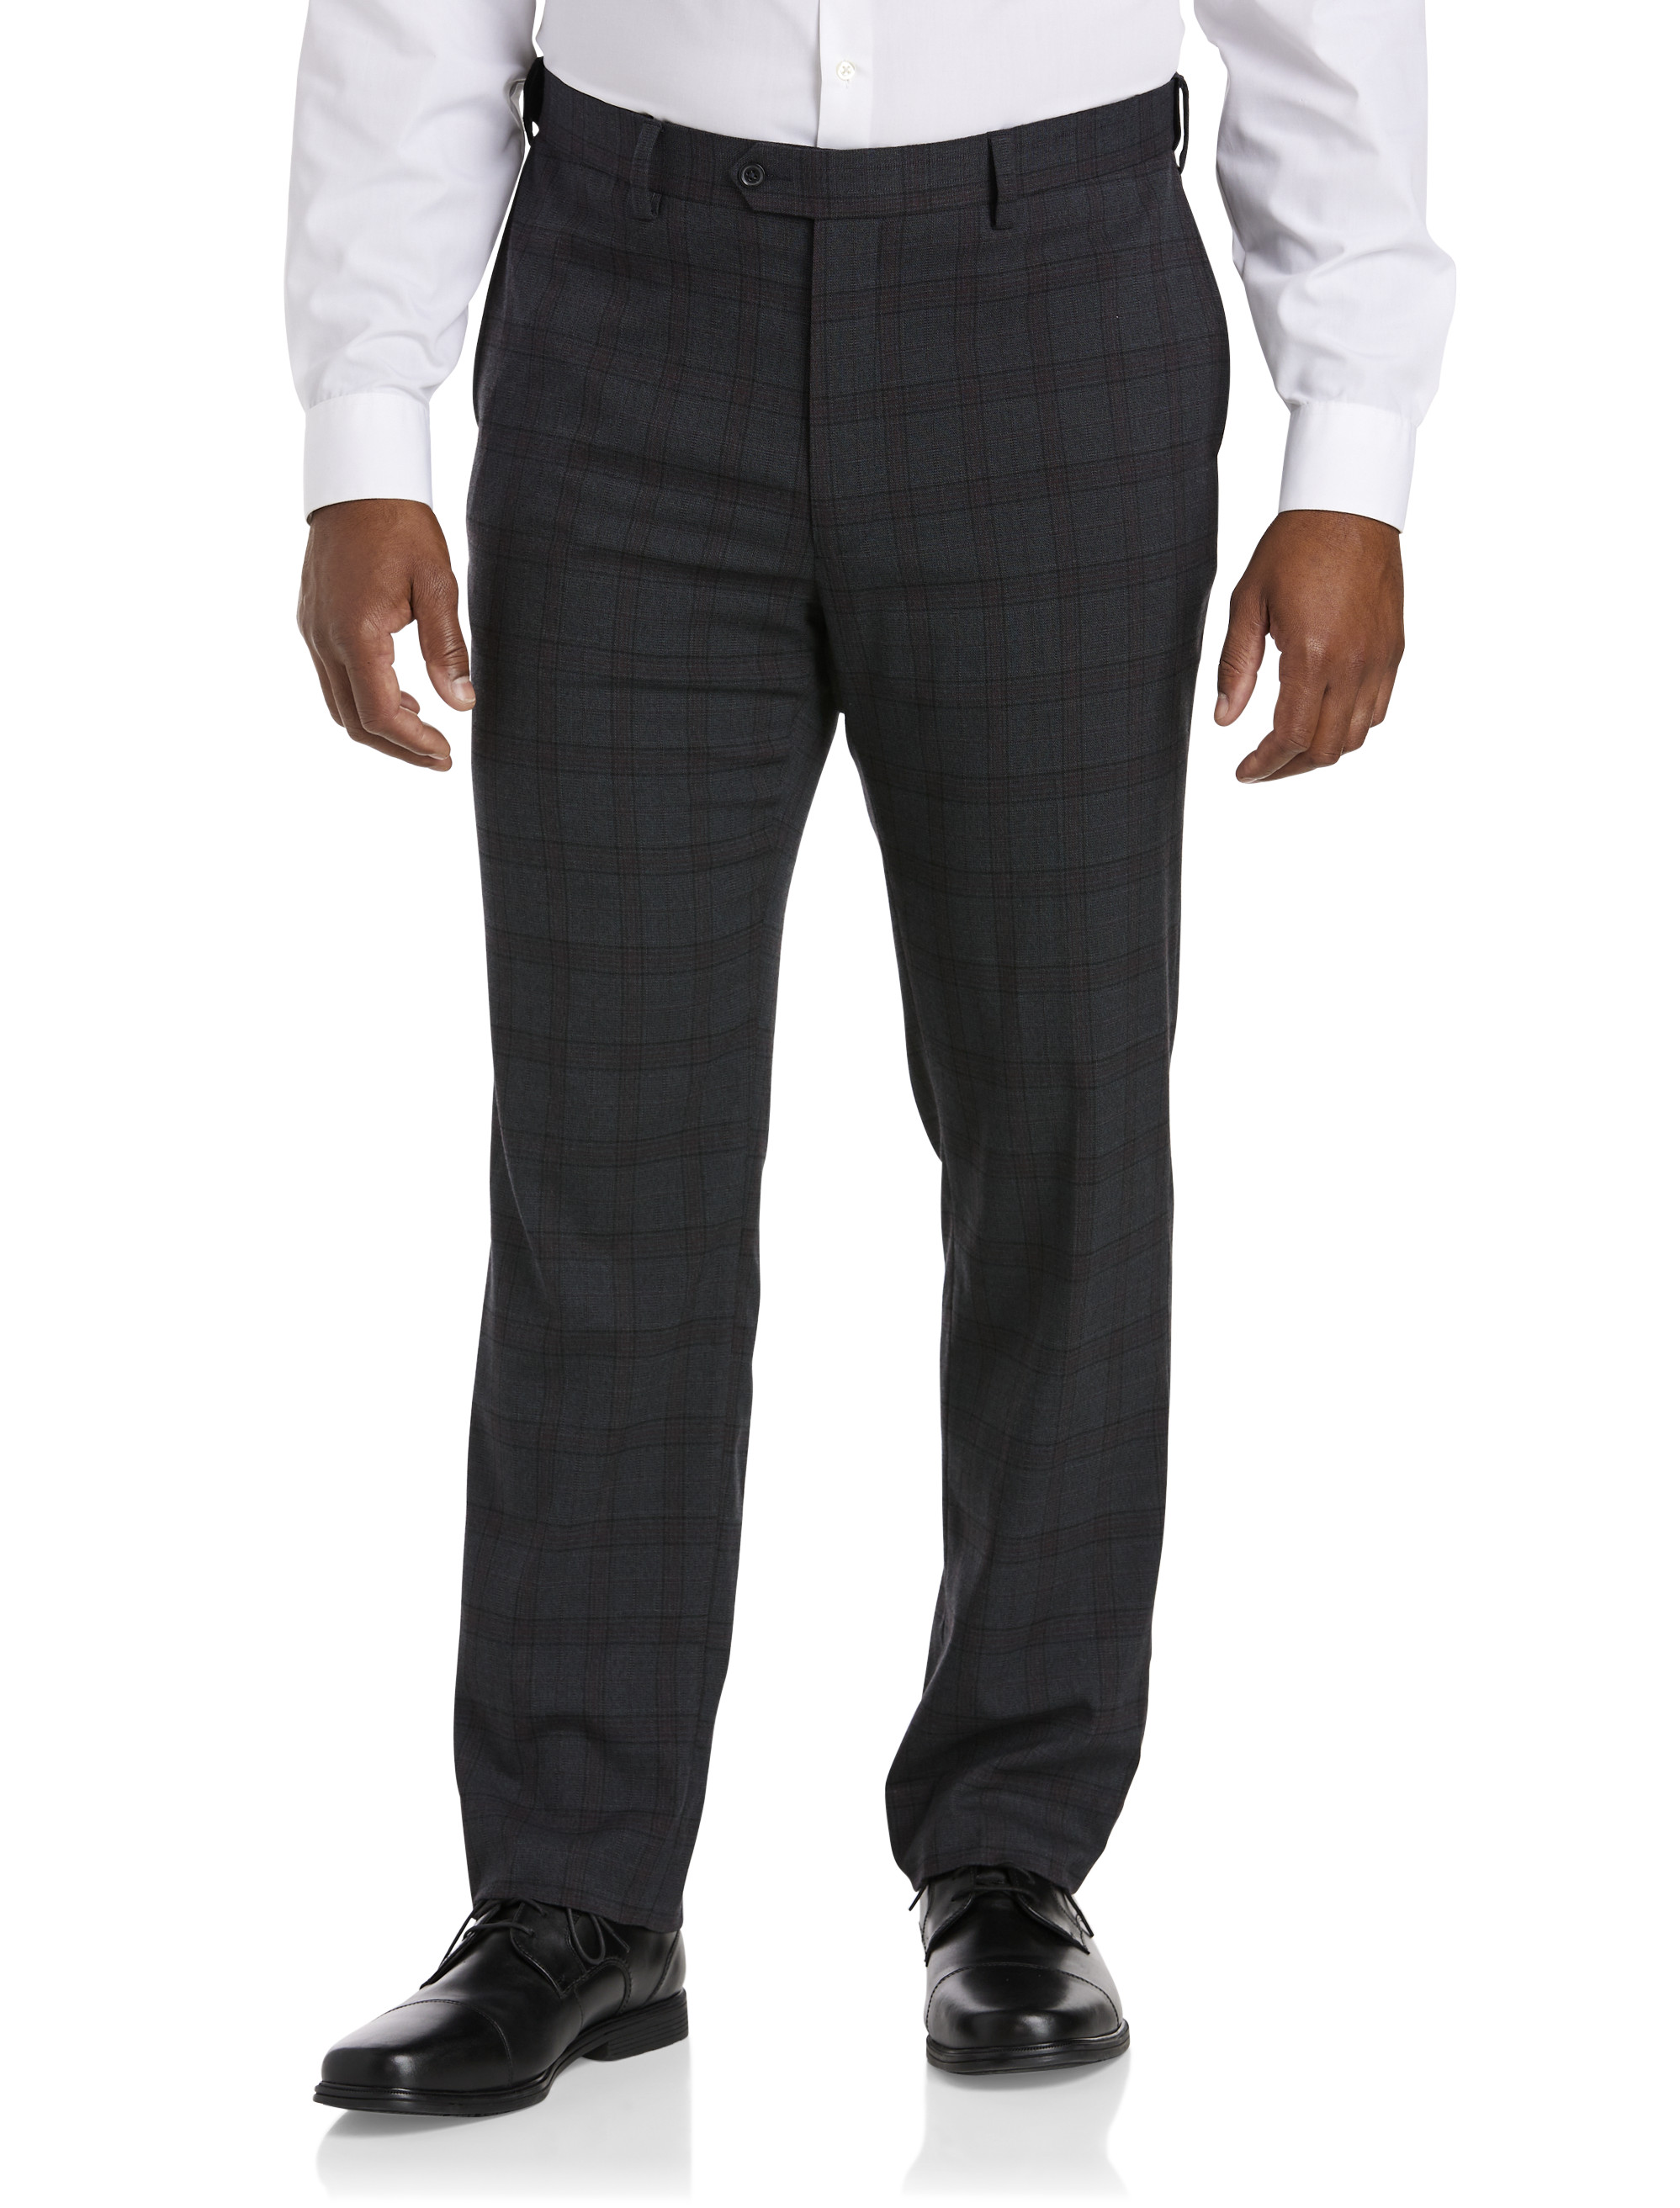 Grey Plaid Dress Pants with Red Dress Shoes Spring Outfits For Men